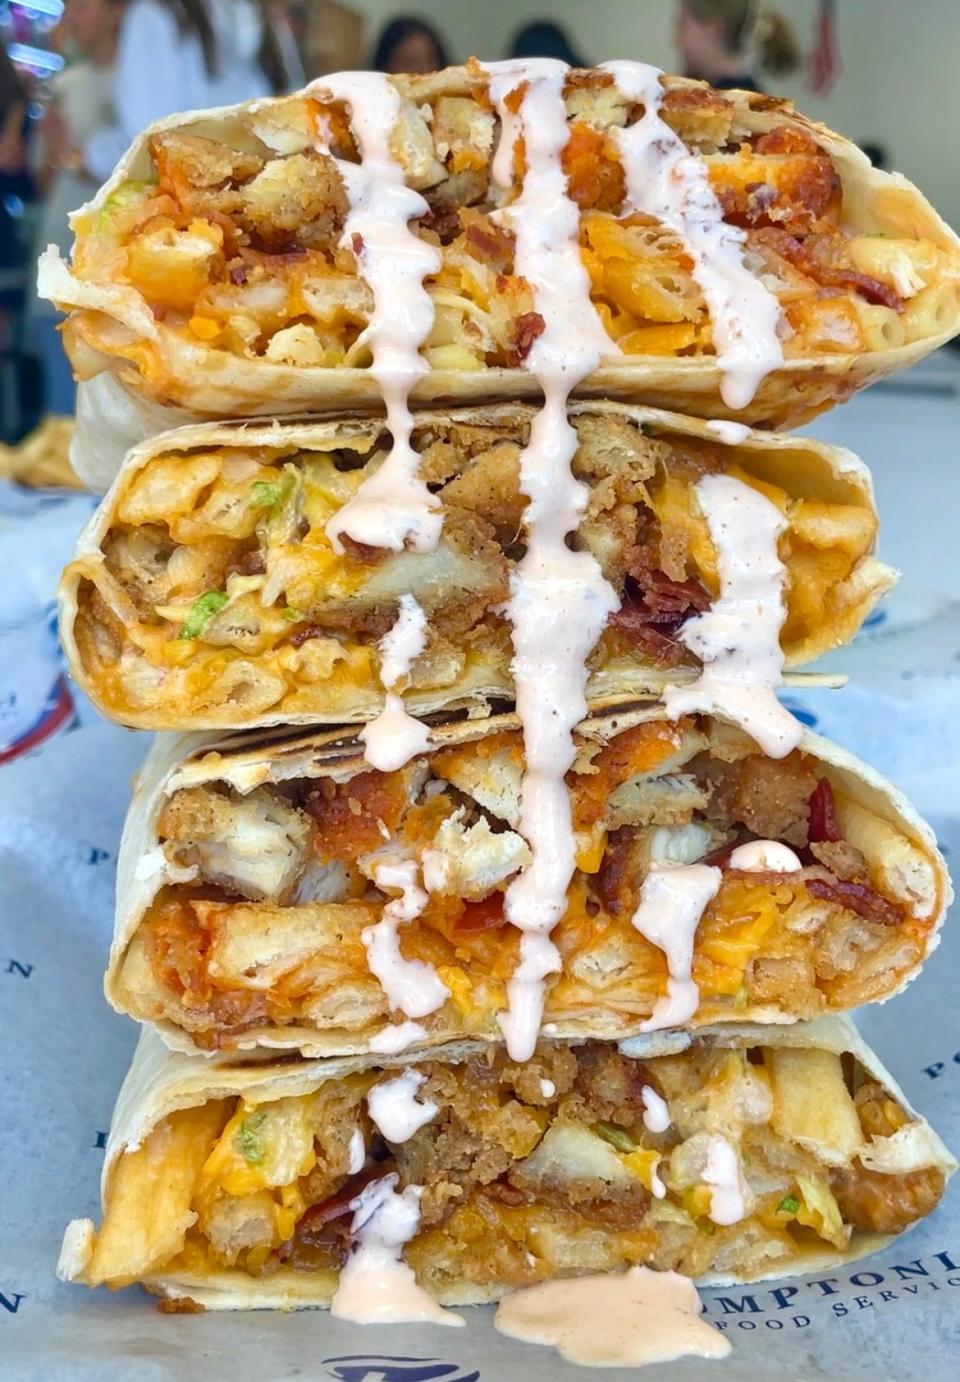 A stack of gourmet wraps at a North Jersey high school.